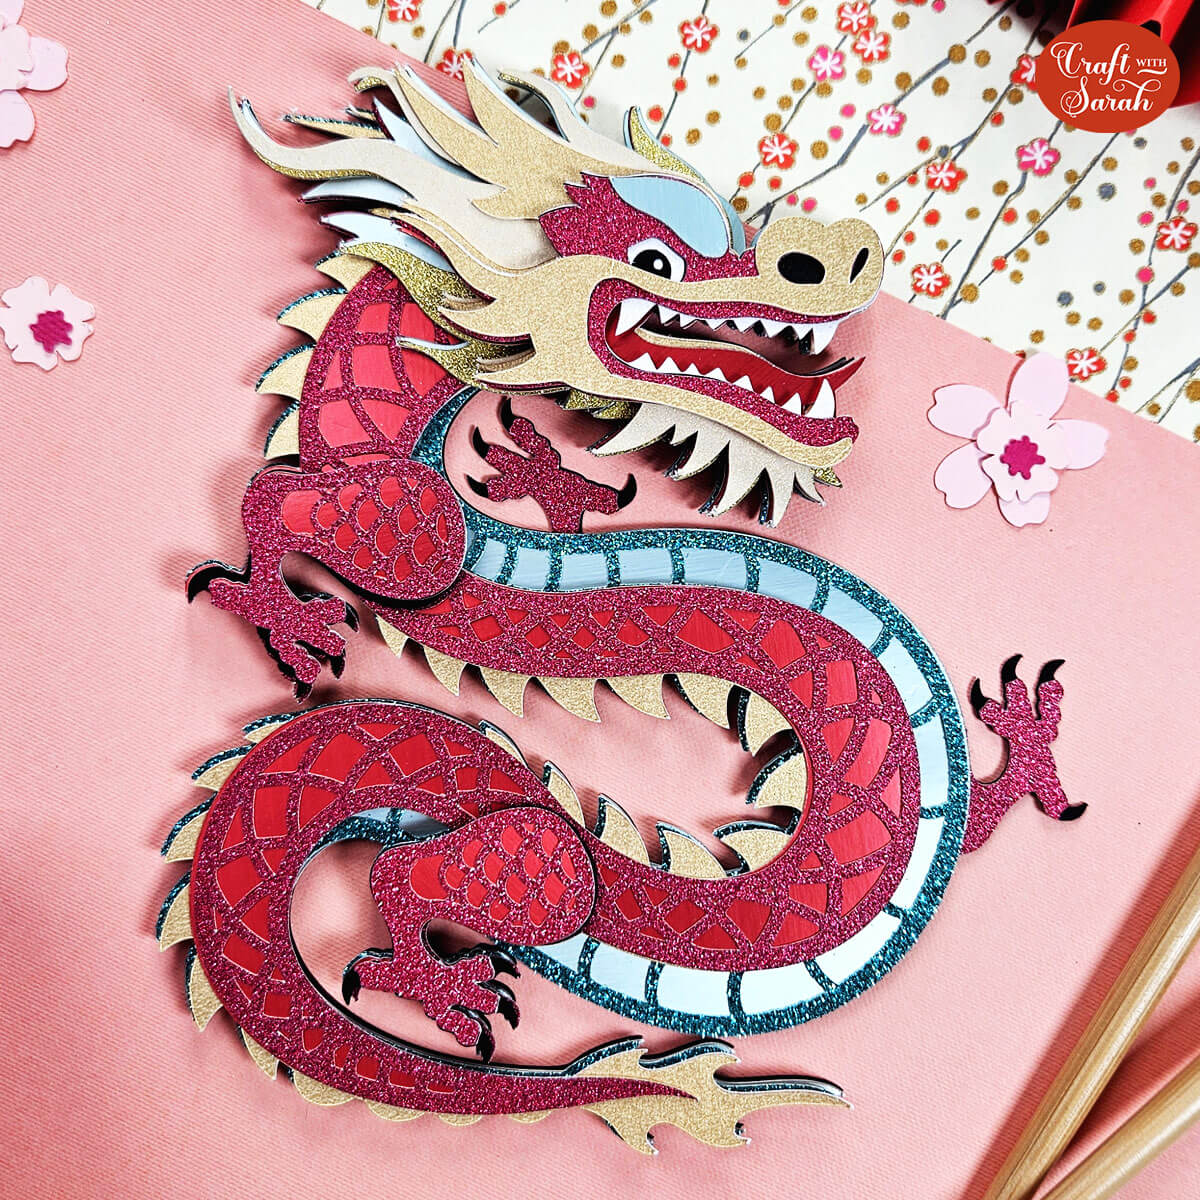 Chinese New Year dragon craft project